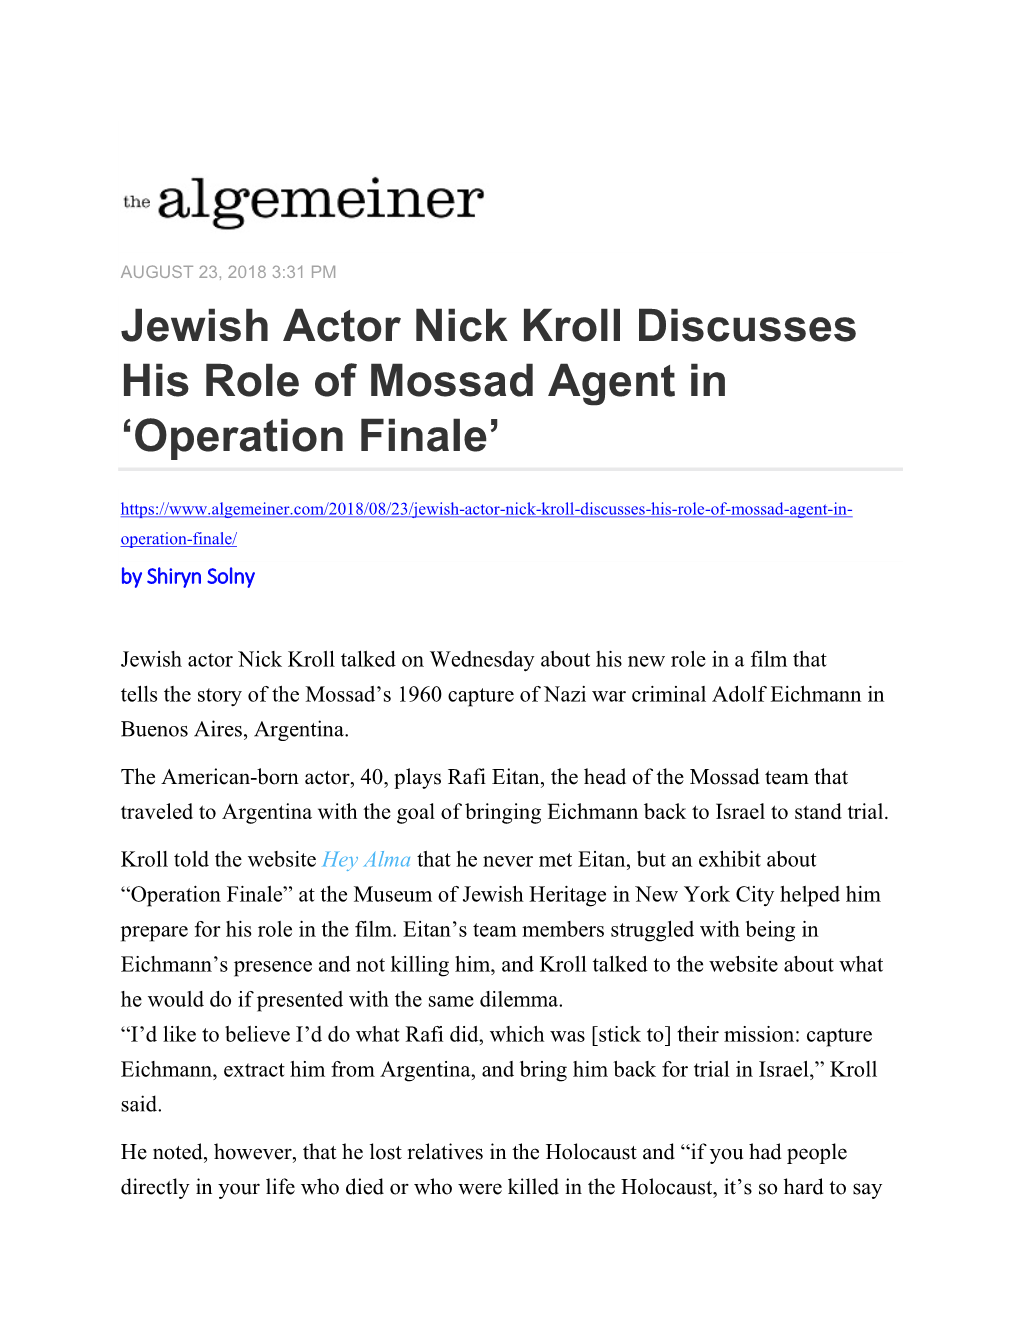 Jewish Actor Nick Kroll Discusses His Role of Mossad Agent in 'Operation